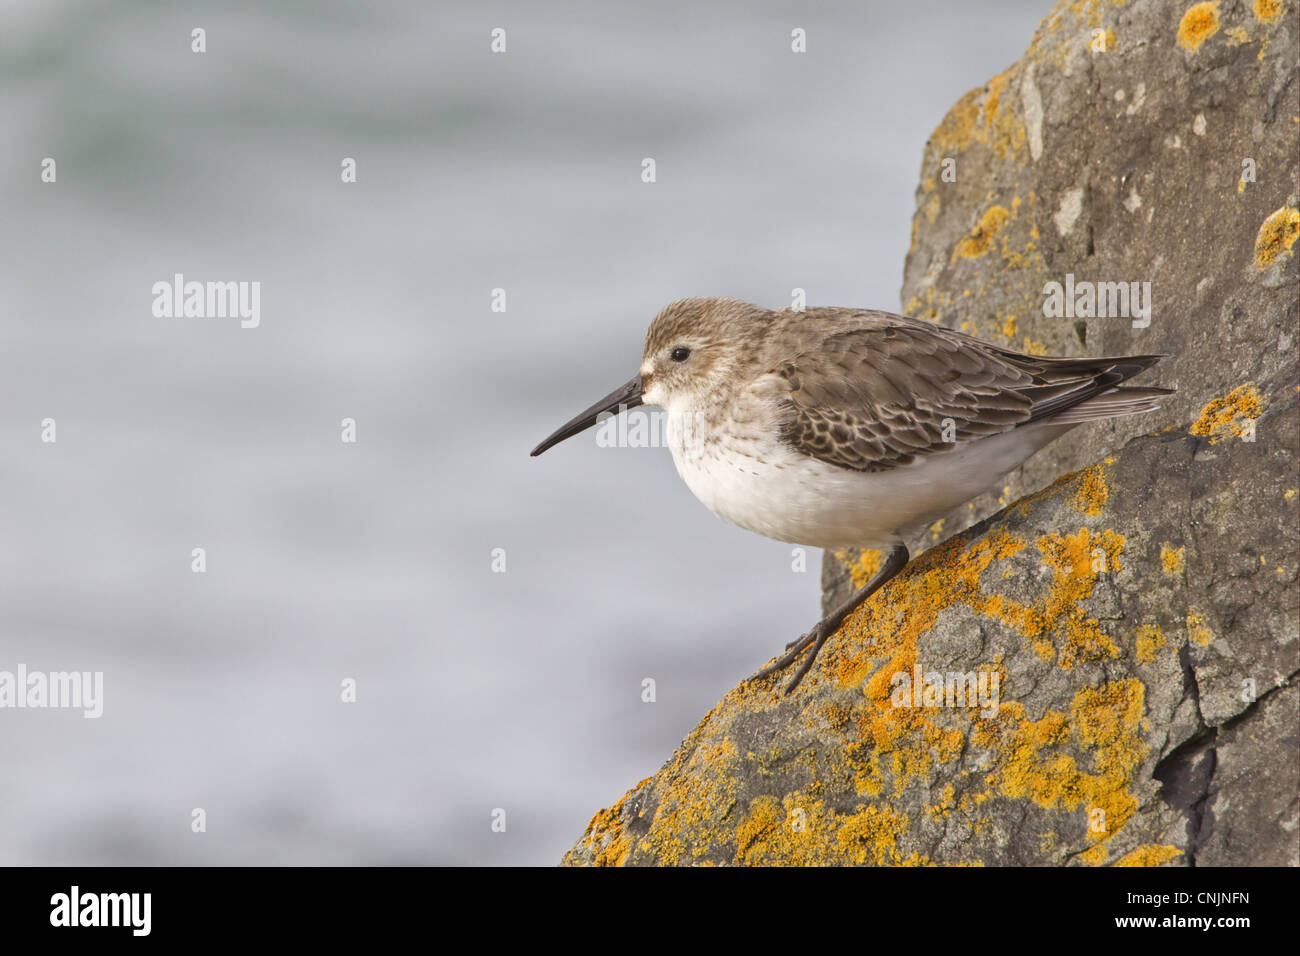 Dunlin Calidris alpina adult winter plumage standing on lichen covered rocks Bangor County Down Northern Ireland february Stock Photo